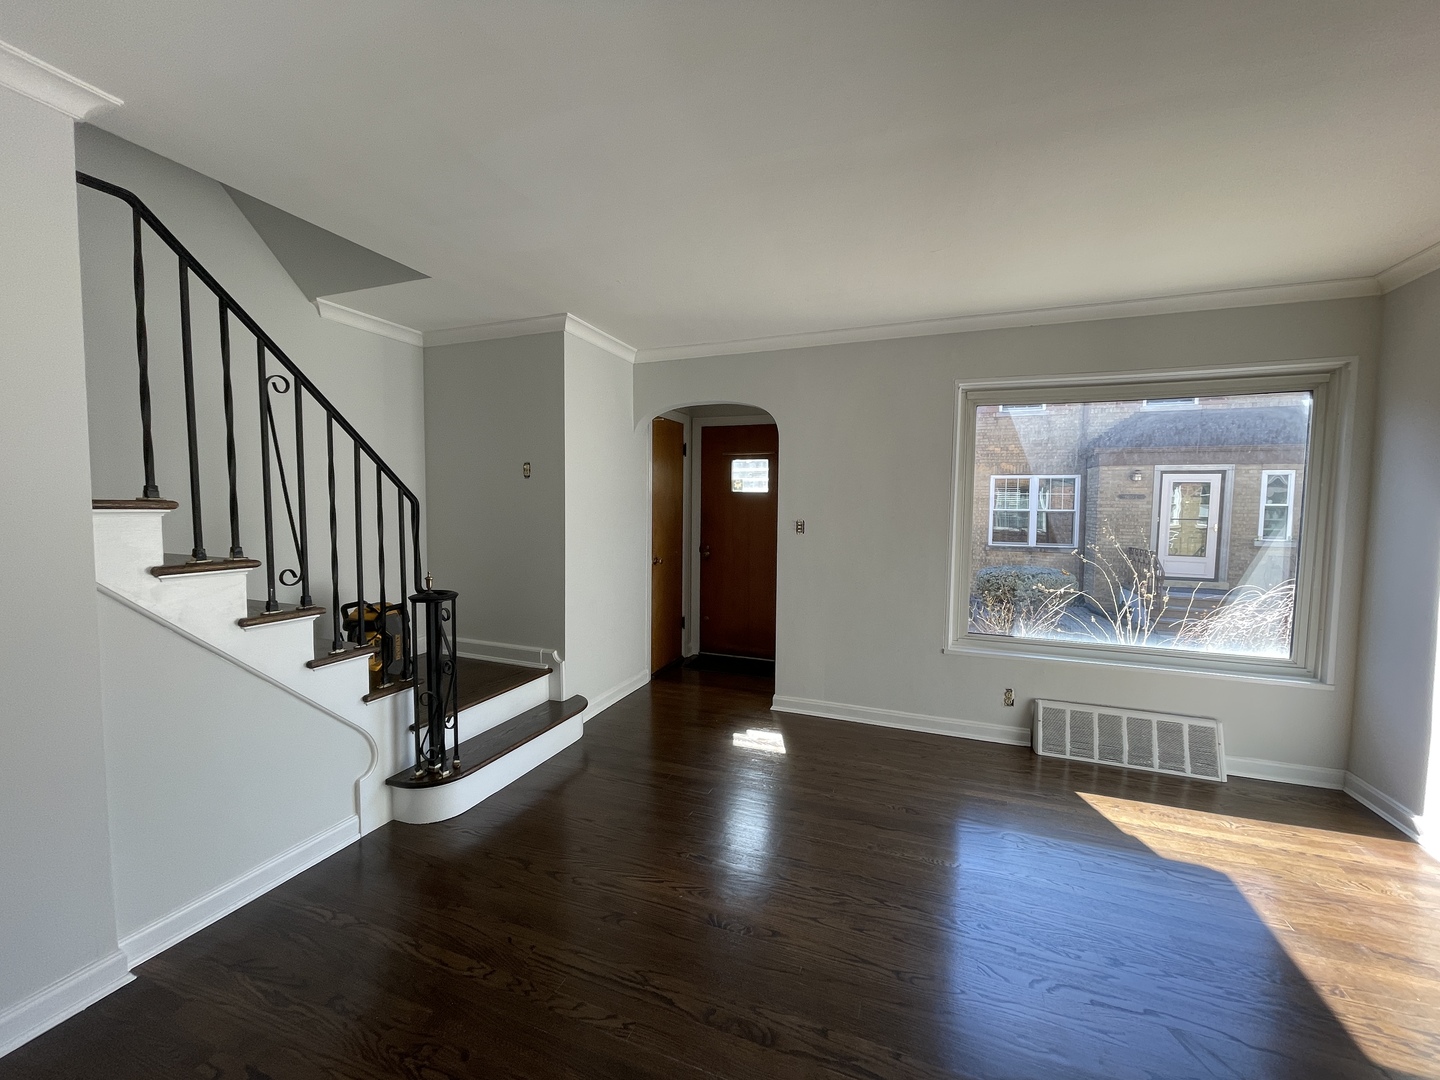 Photo 5 of 18 of 1411 HARLEM Avenue B townhome